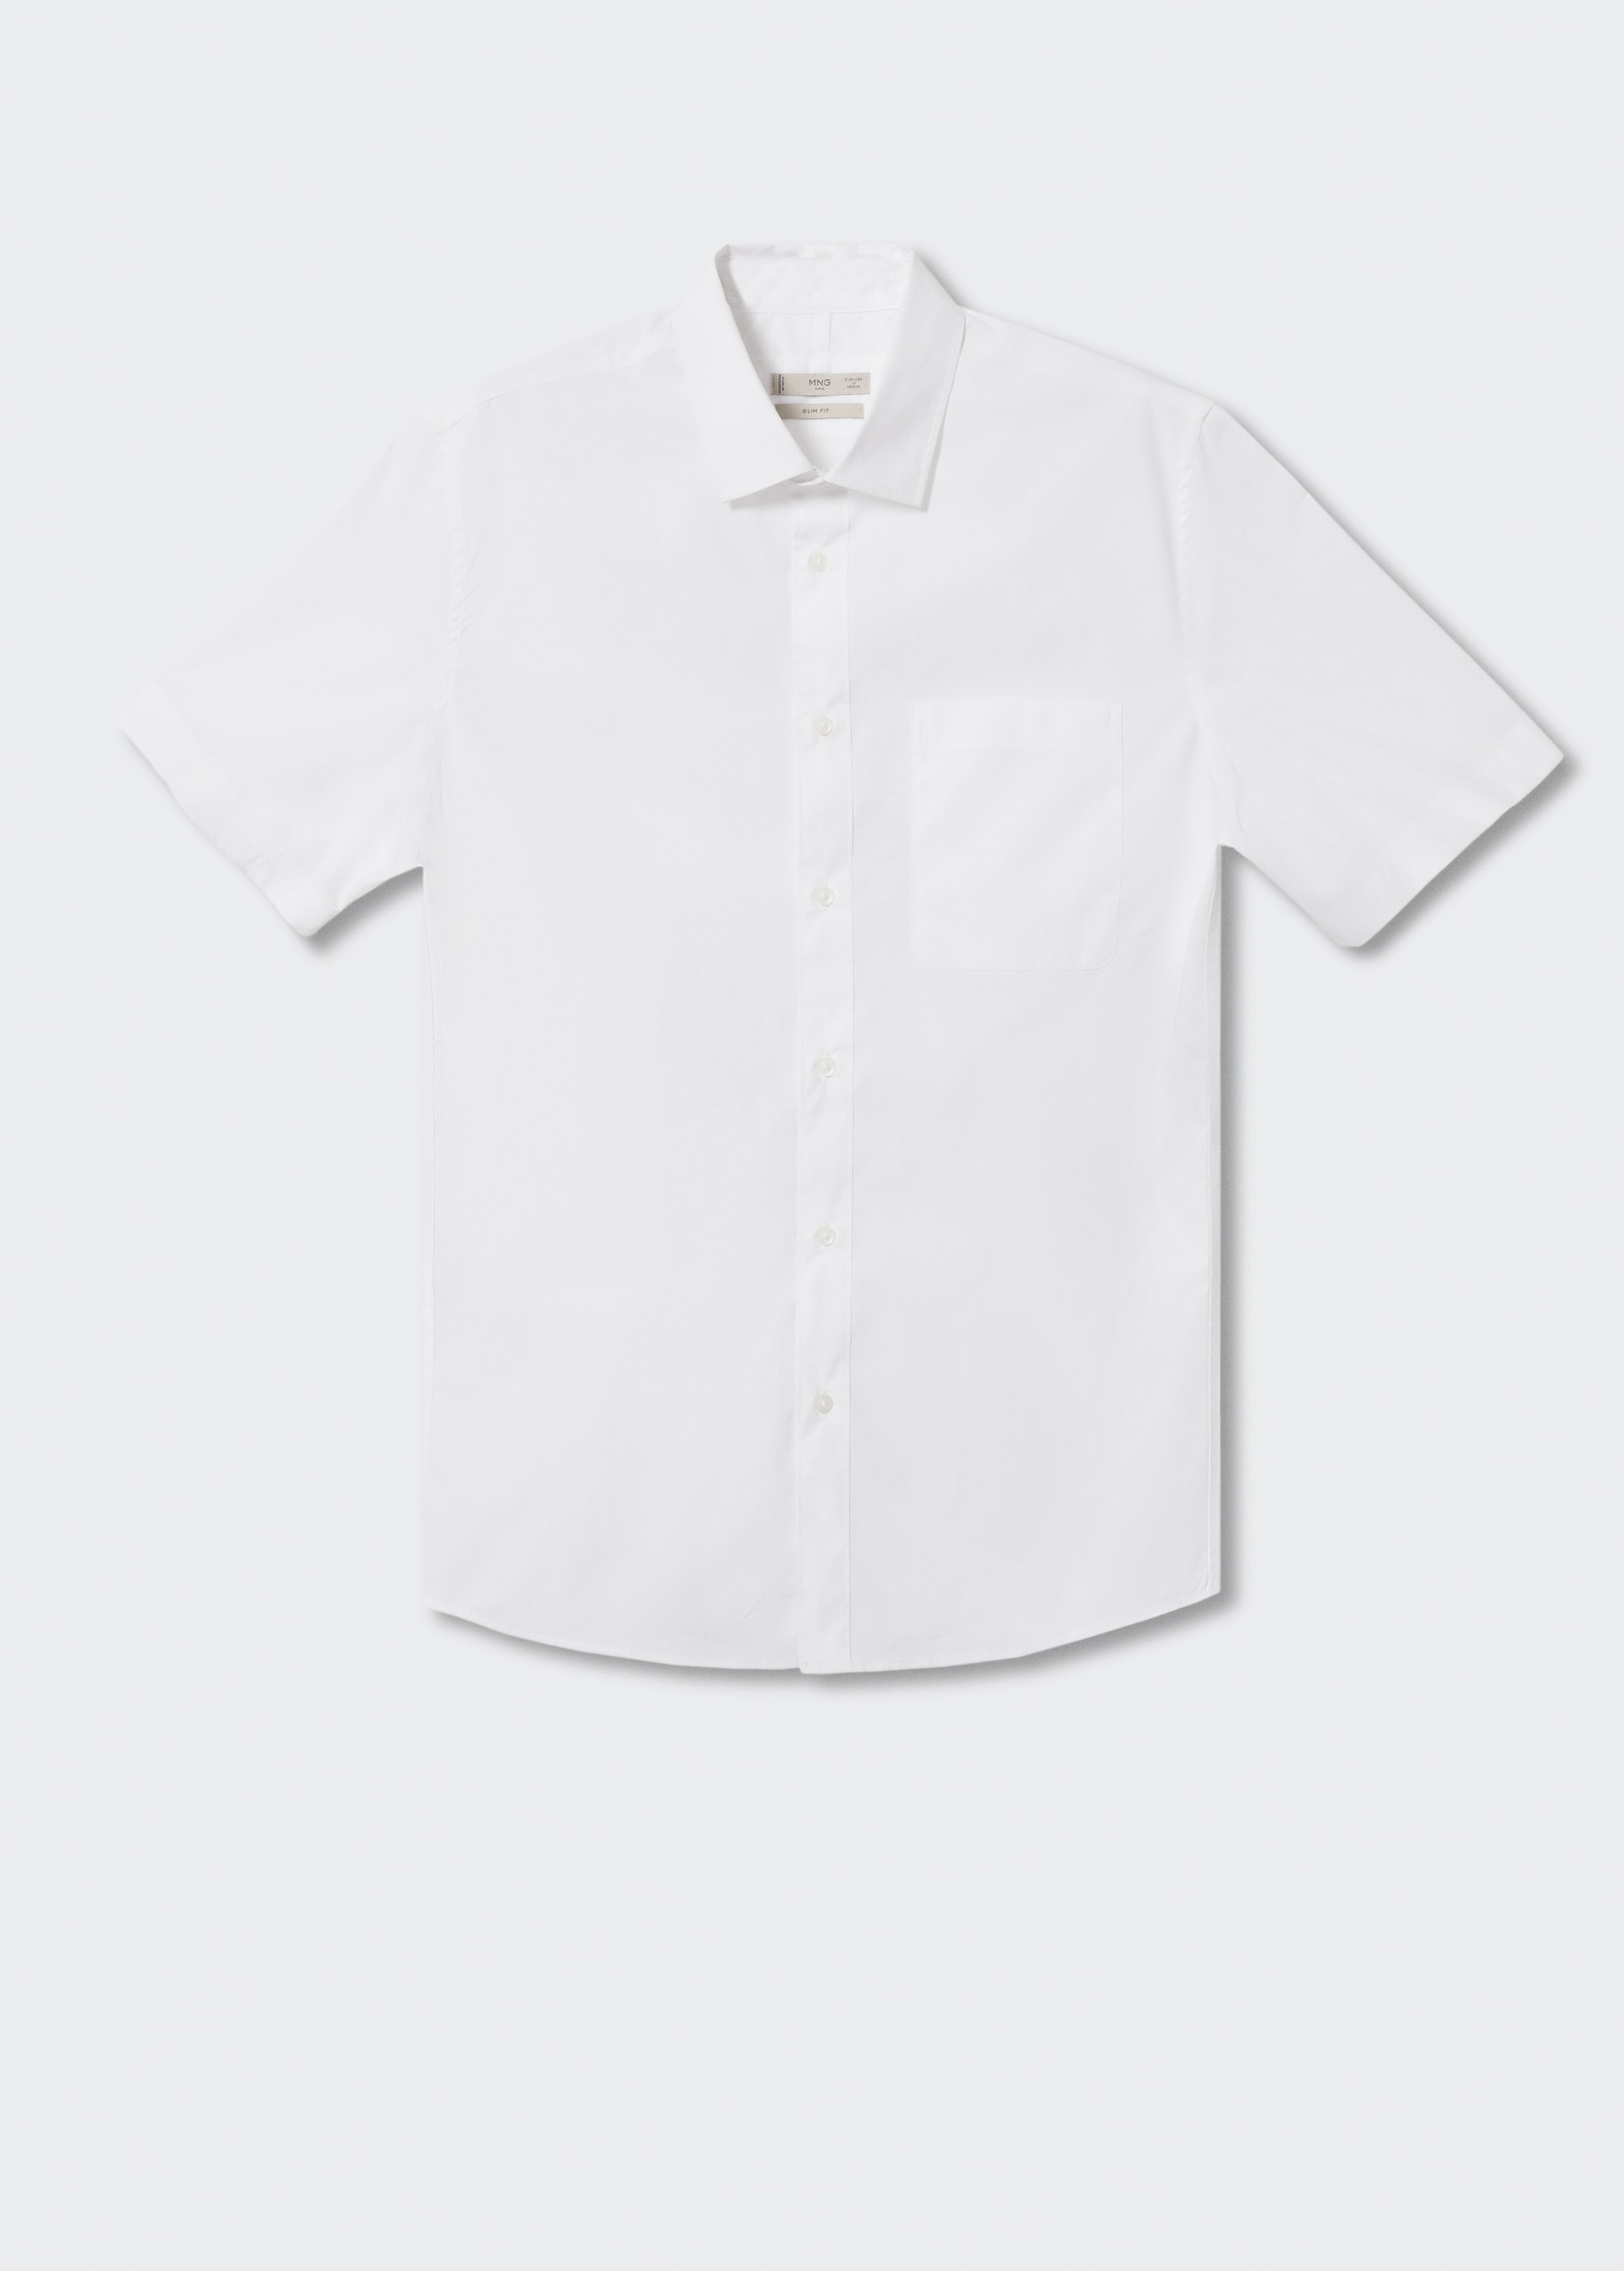 Short sleeved cotton shirt - Article without model